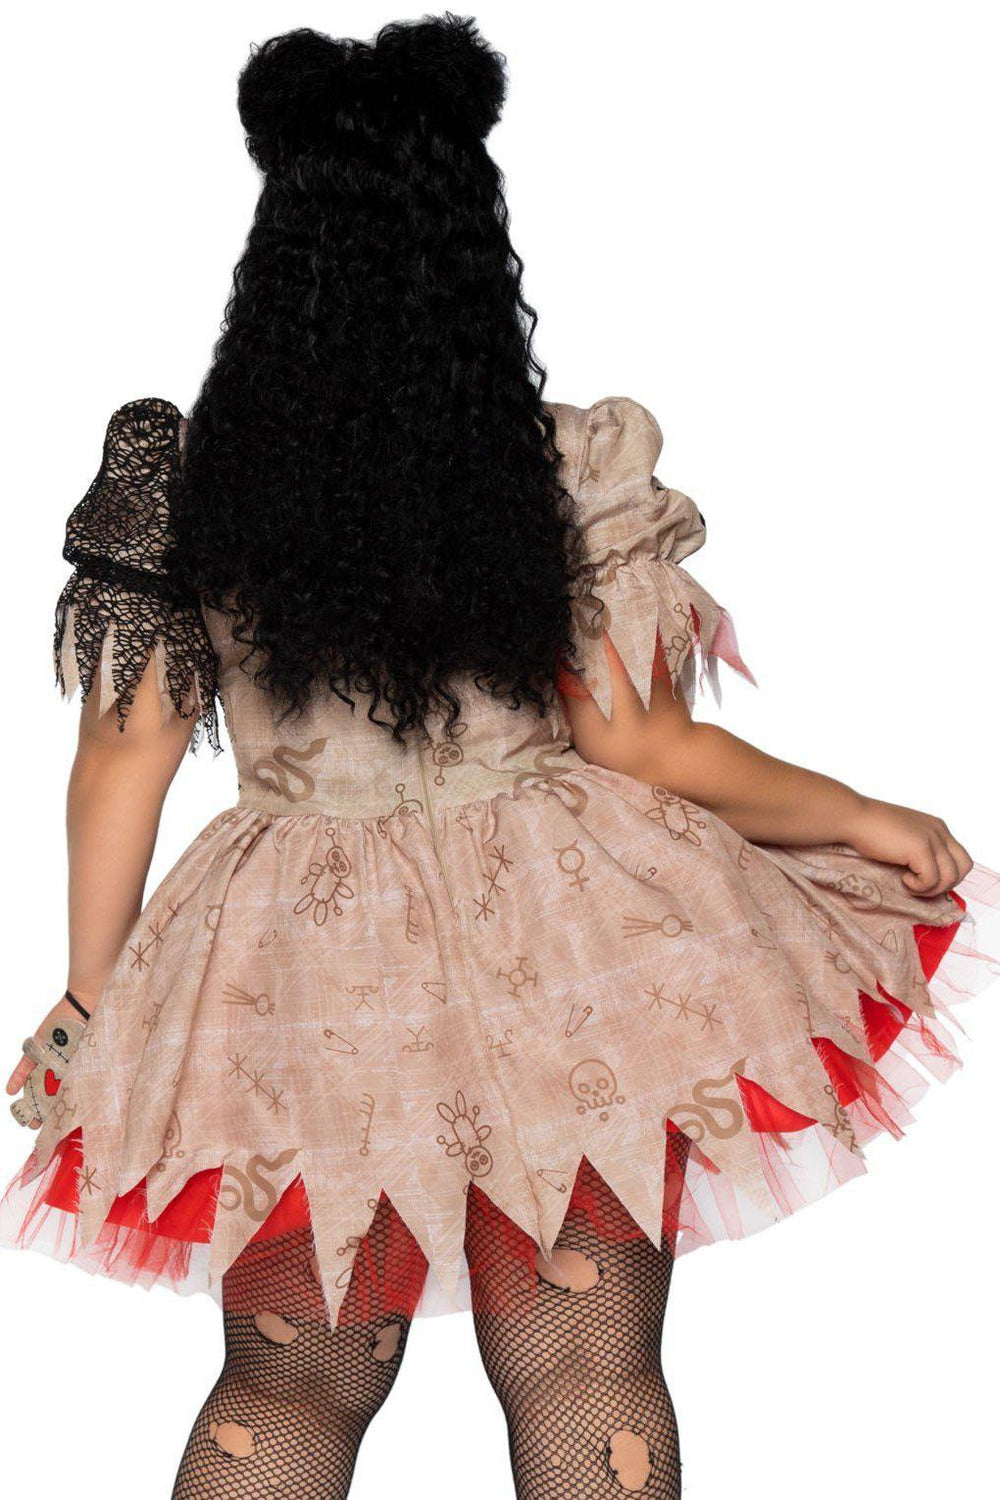 Plus Size Deadly Voodoo Doll Costume-Other Costumes-Leg Avenue-SEXYSHOES.COM